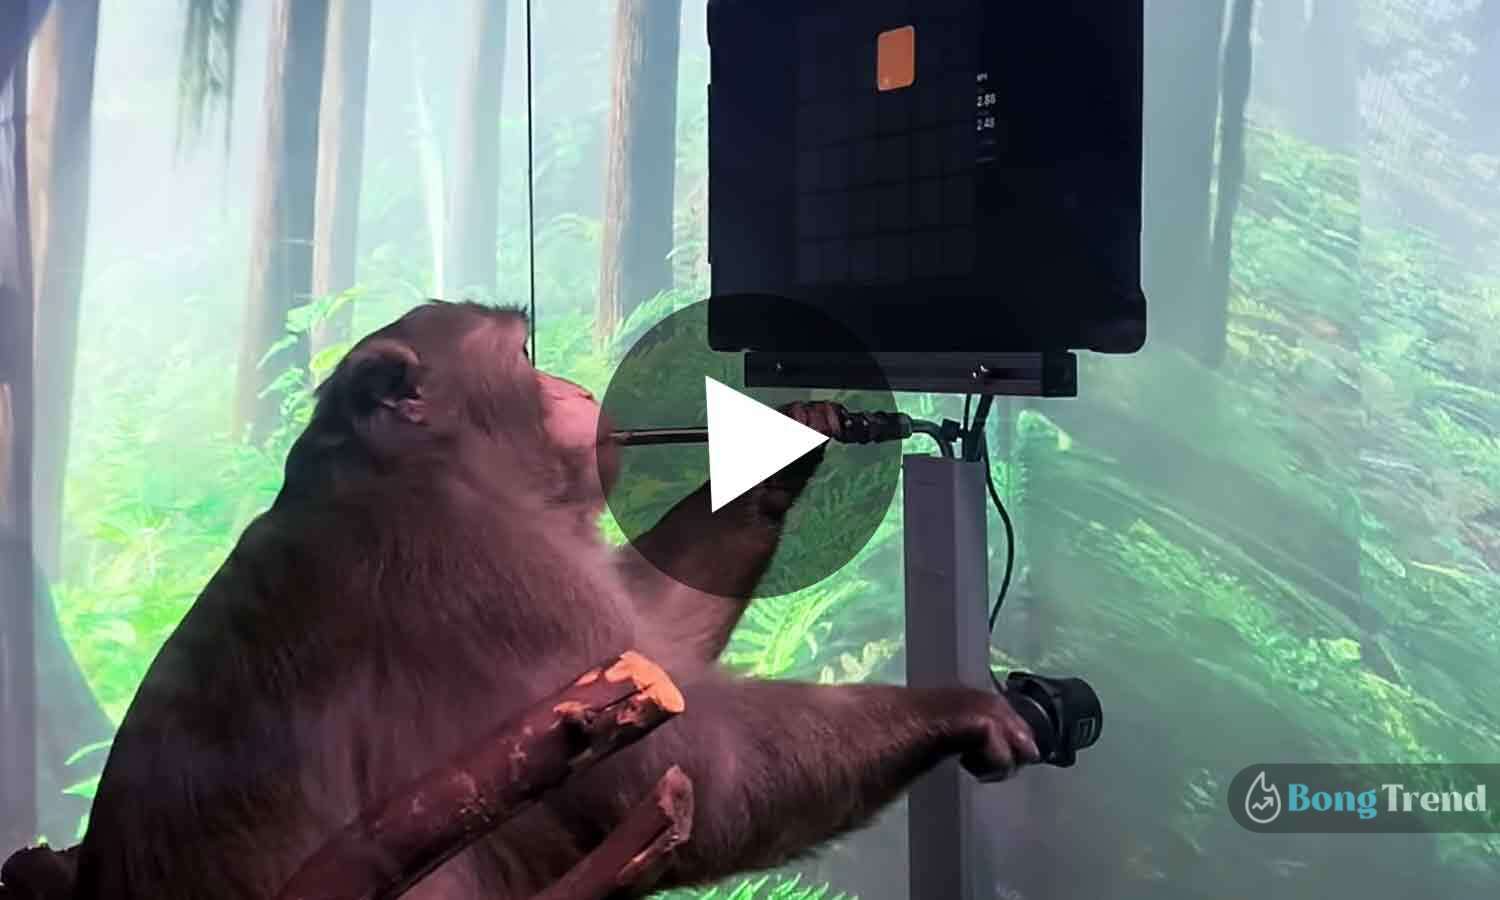 Viral Video of monkeyplaying video game